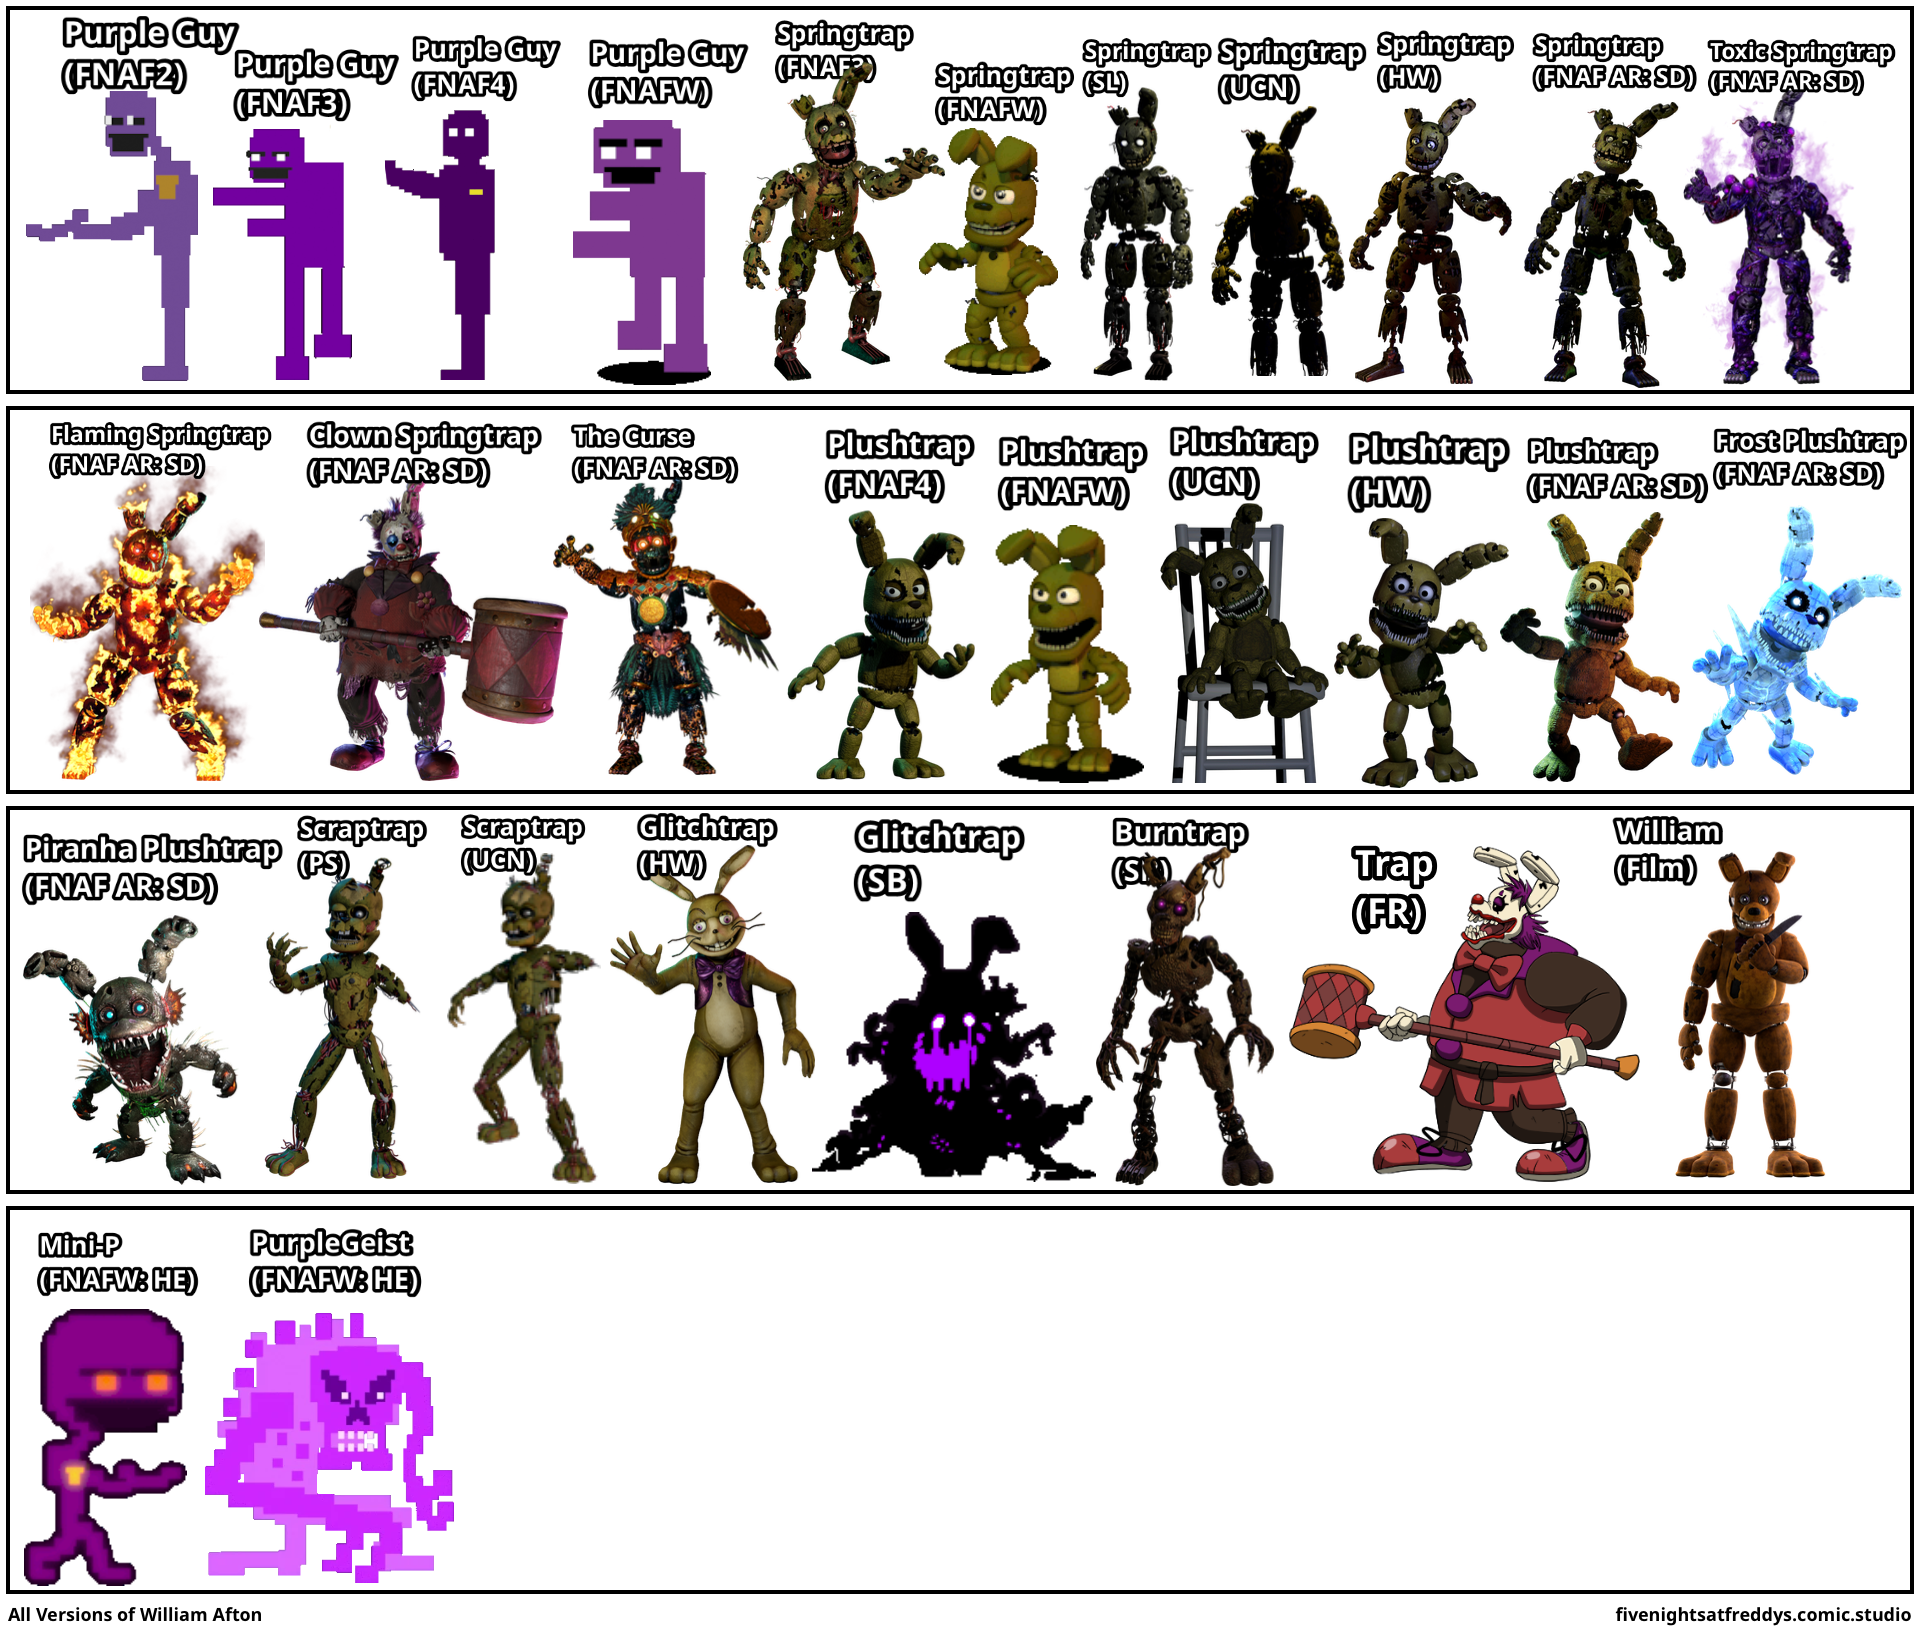 All Versions of William Afton